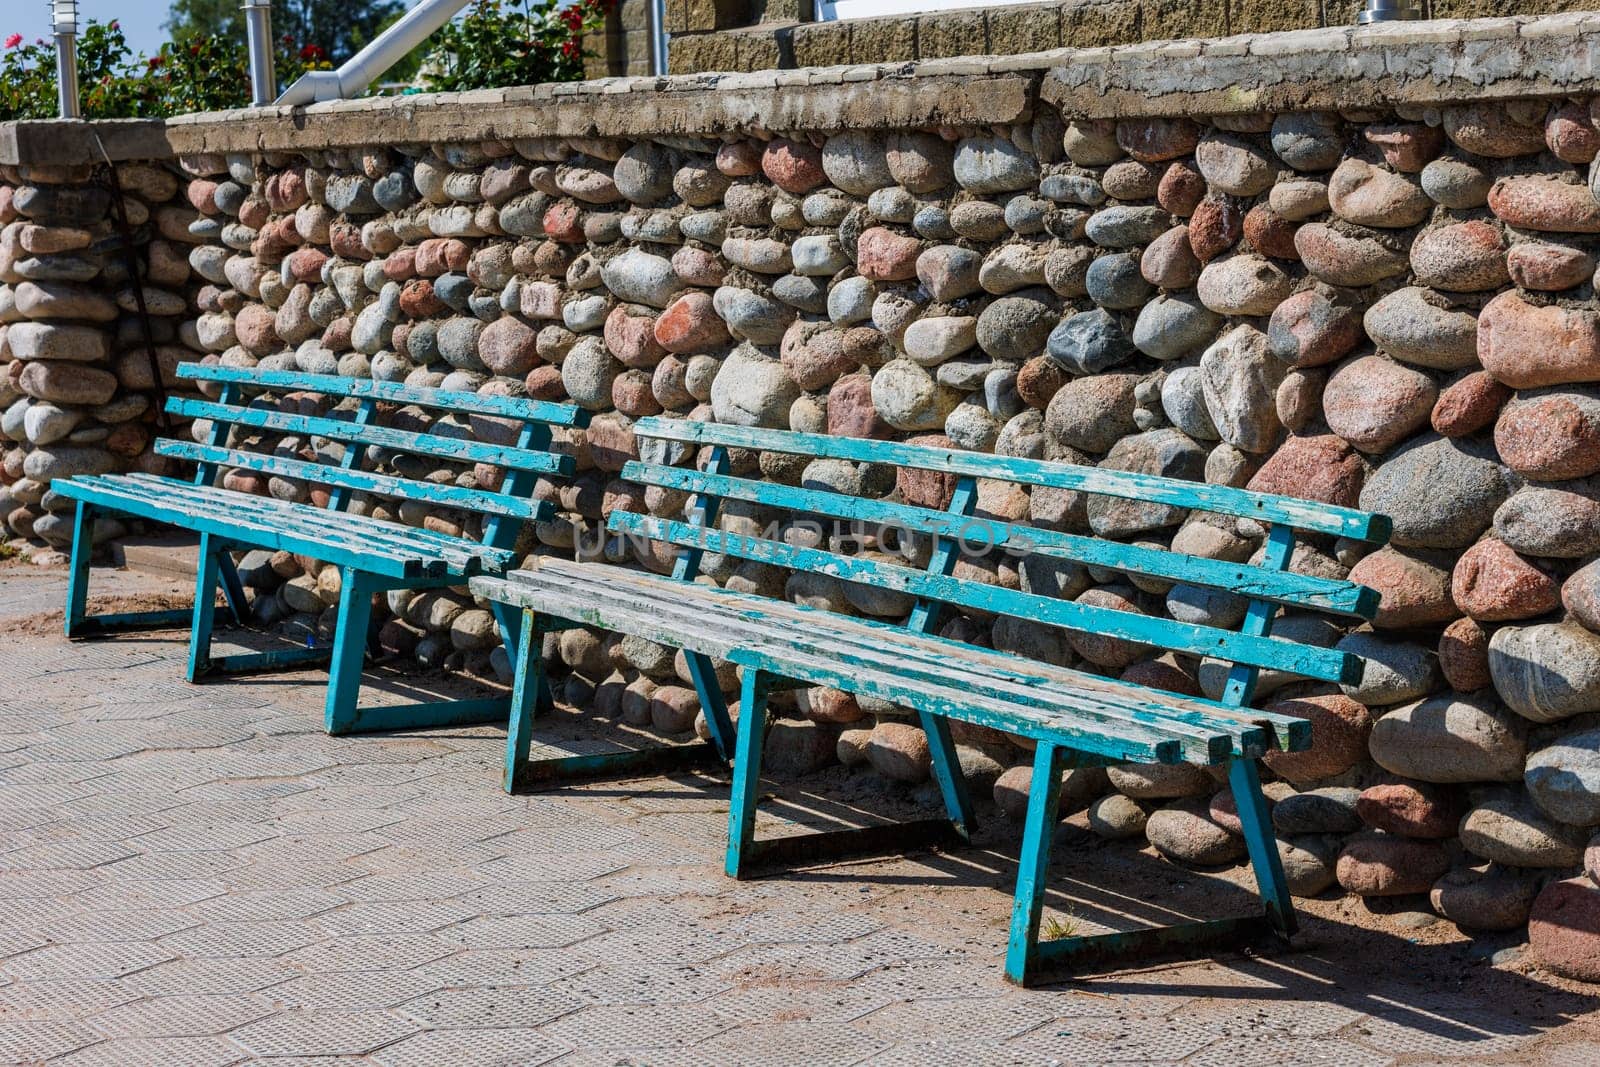 Two vacant outdoor wooden benches with peeled blue paint lined up against a stone wall at sunny summer day.